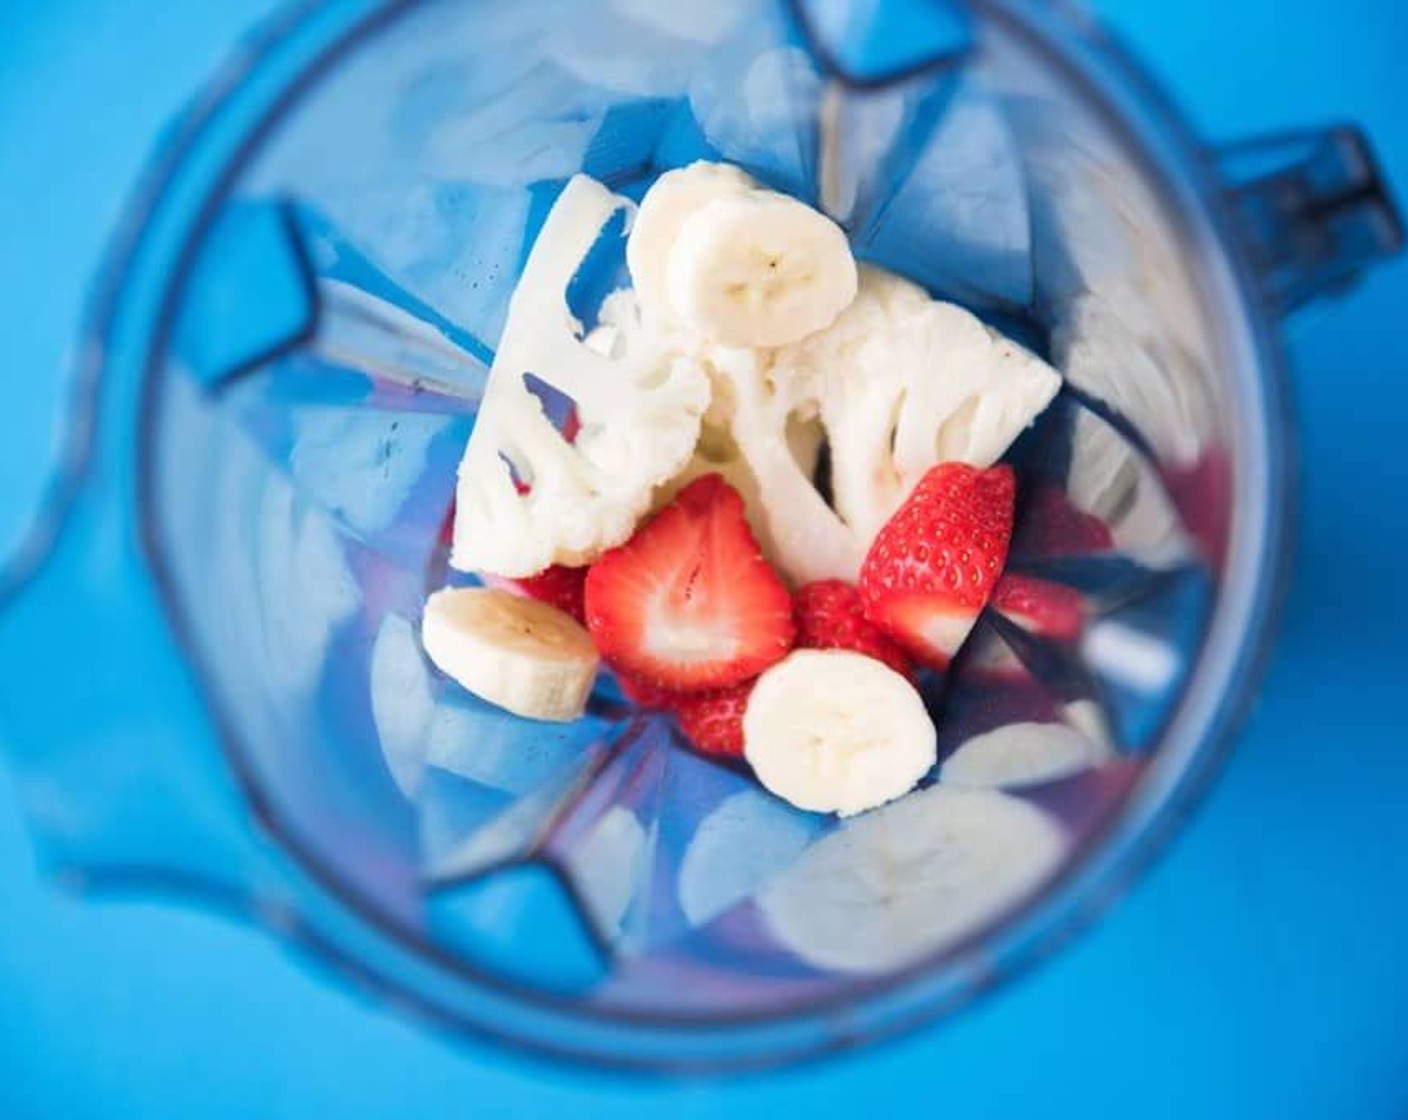 step 1 Blend Cauliflower Florets (1 cup), Fresh Strawberry (1 cup), Banana (1), and Milk (1 cup) until smooth, adding more milk as needed if using more than 1 frozen ingredient. Optionally sweeten with Honey (to taste).